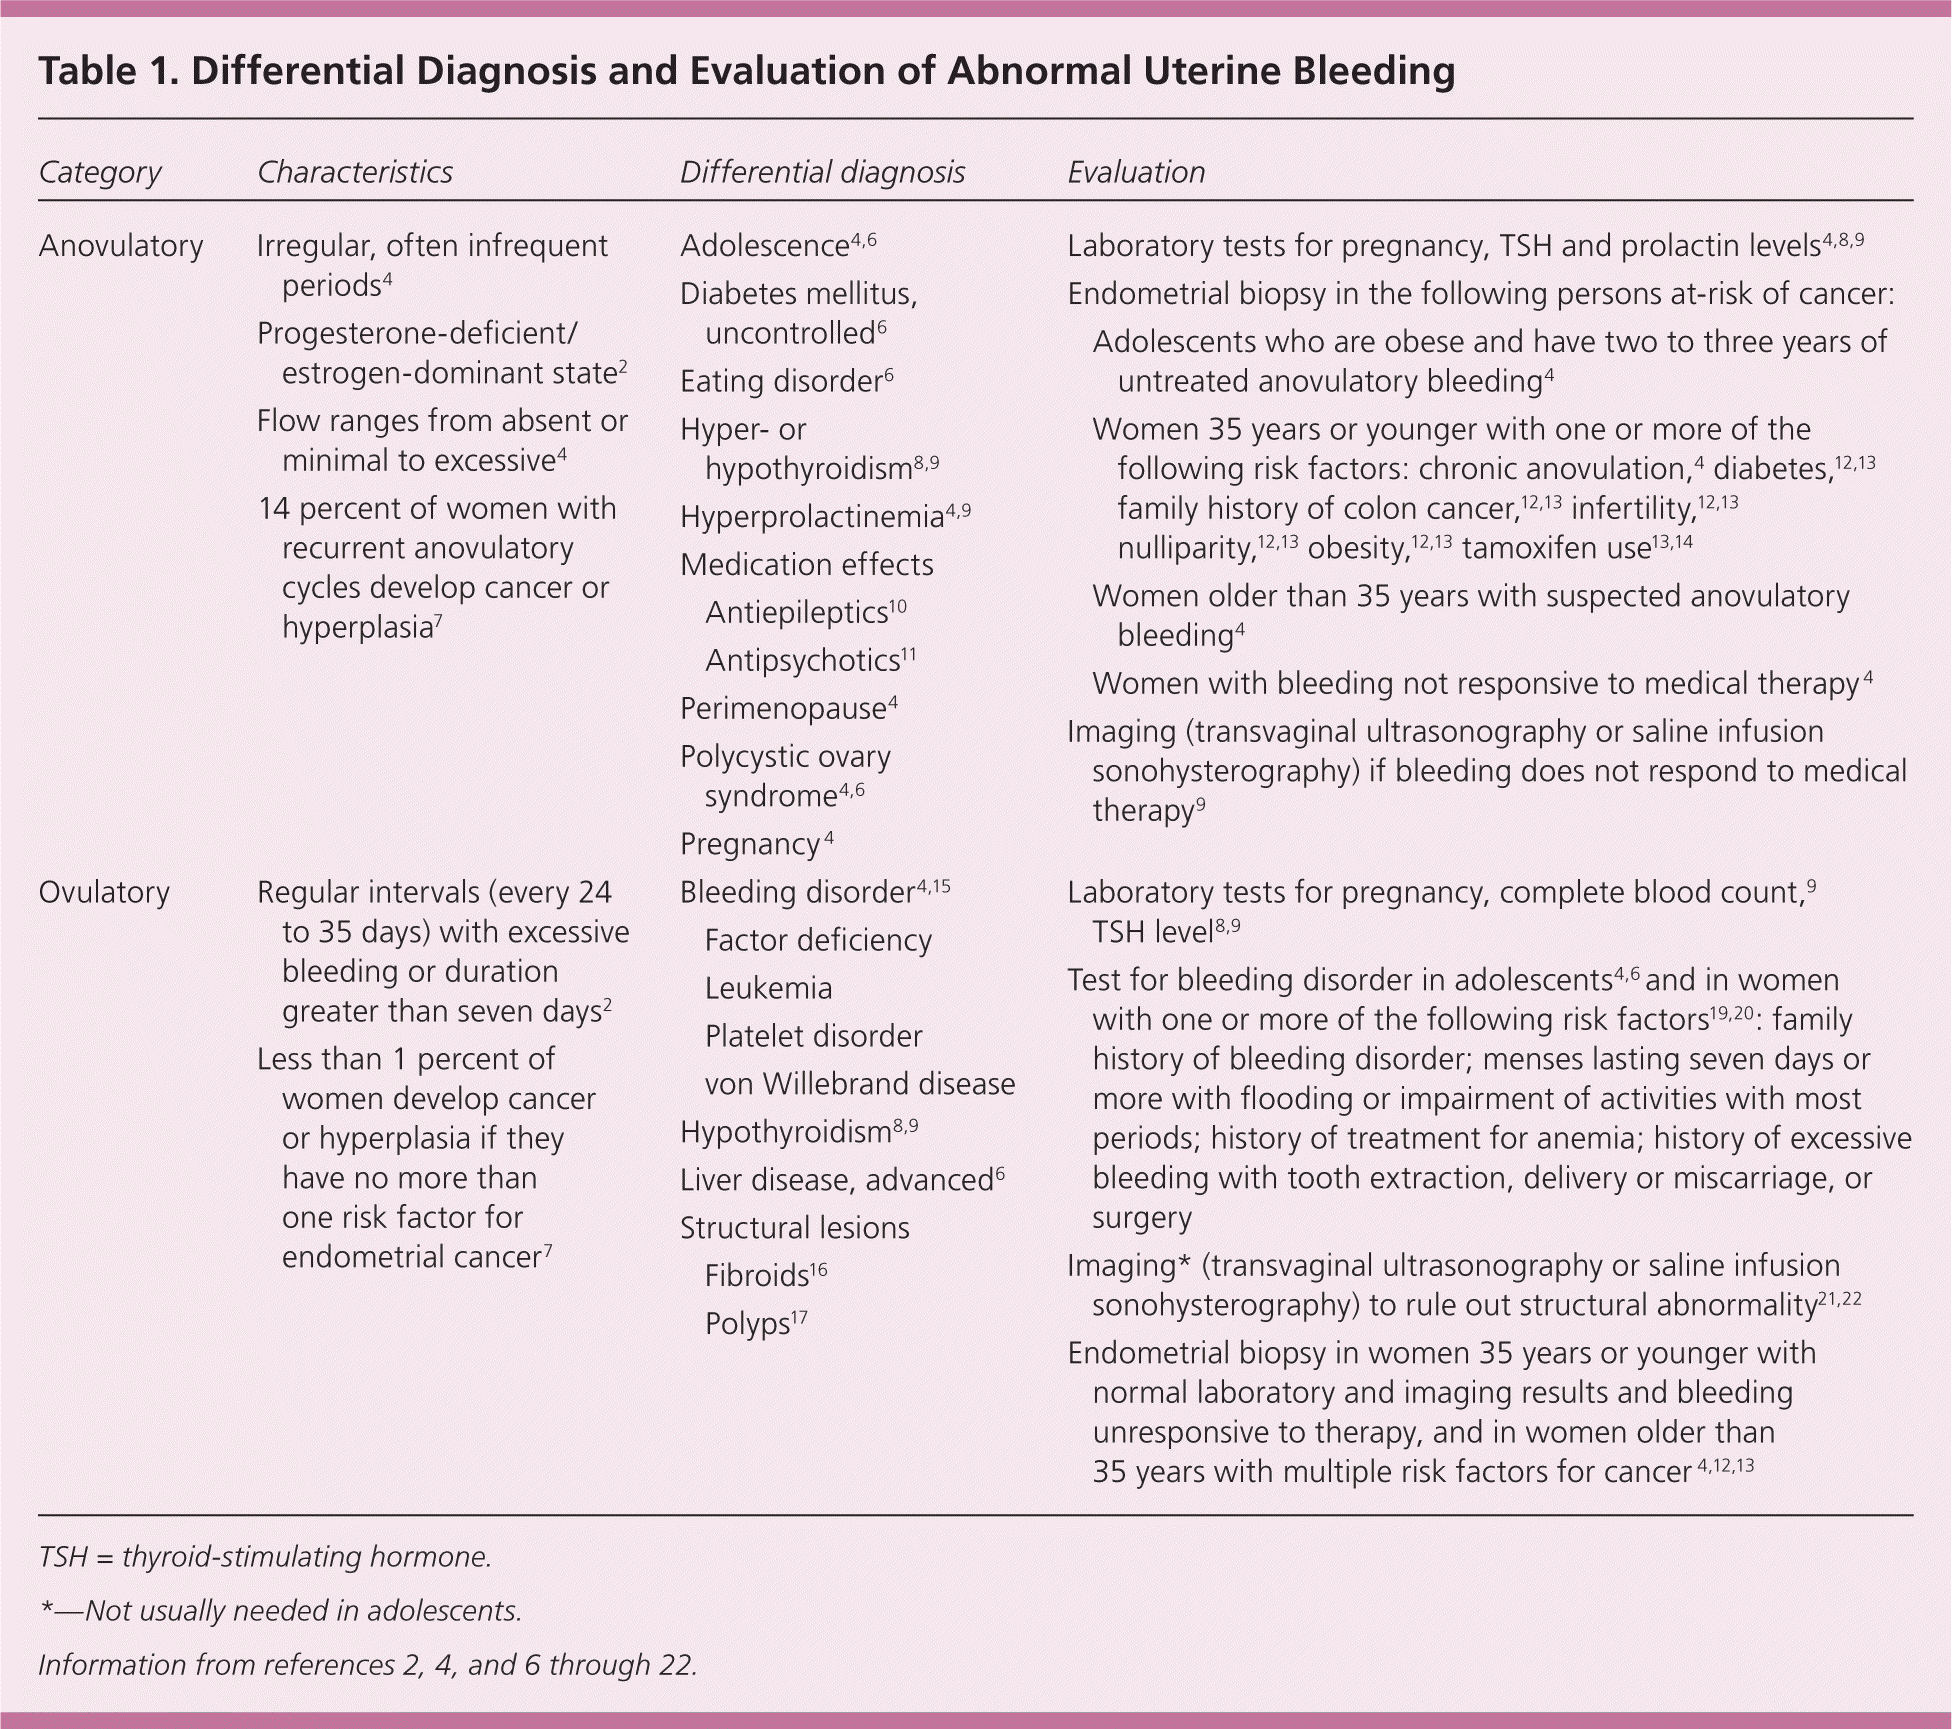 Evaluation and Management of Abnormal Uterine Bleeding in